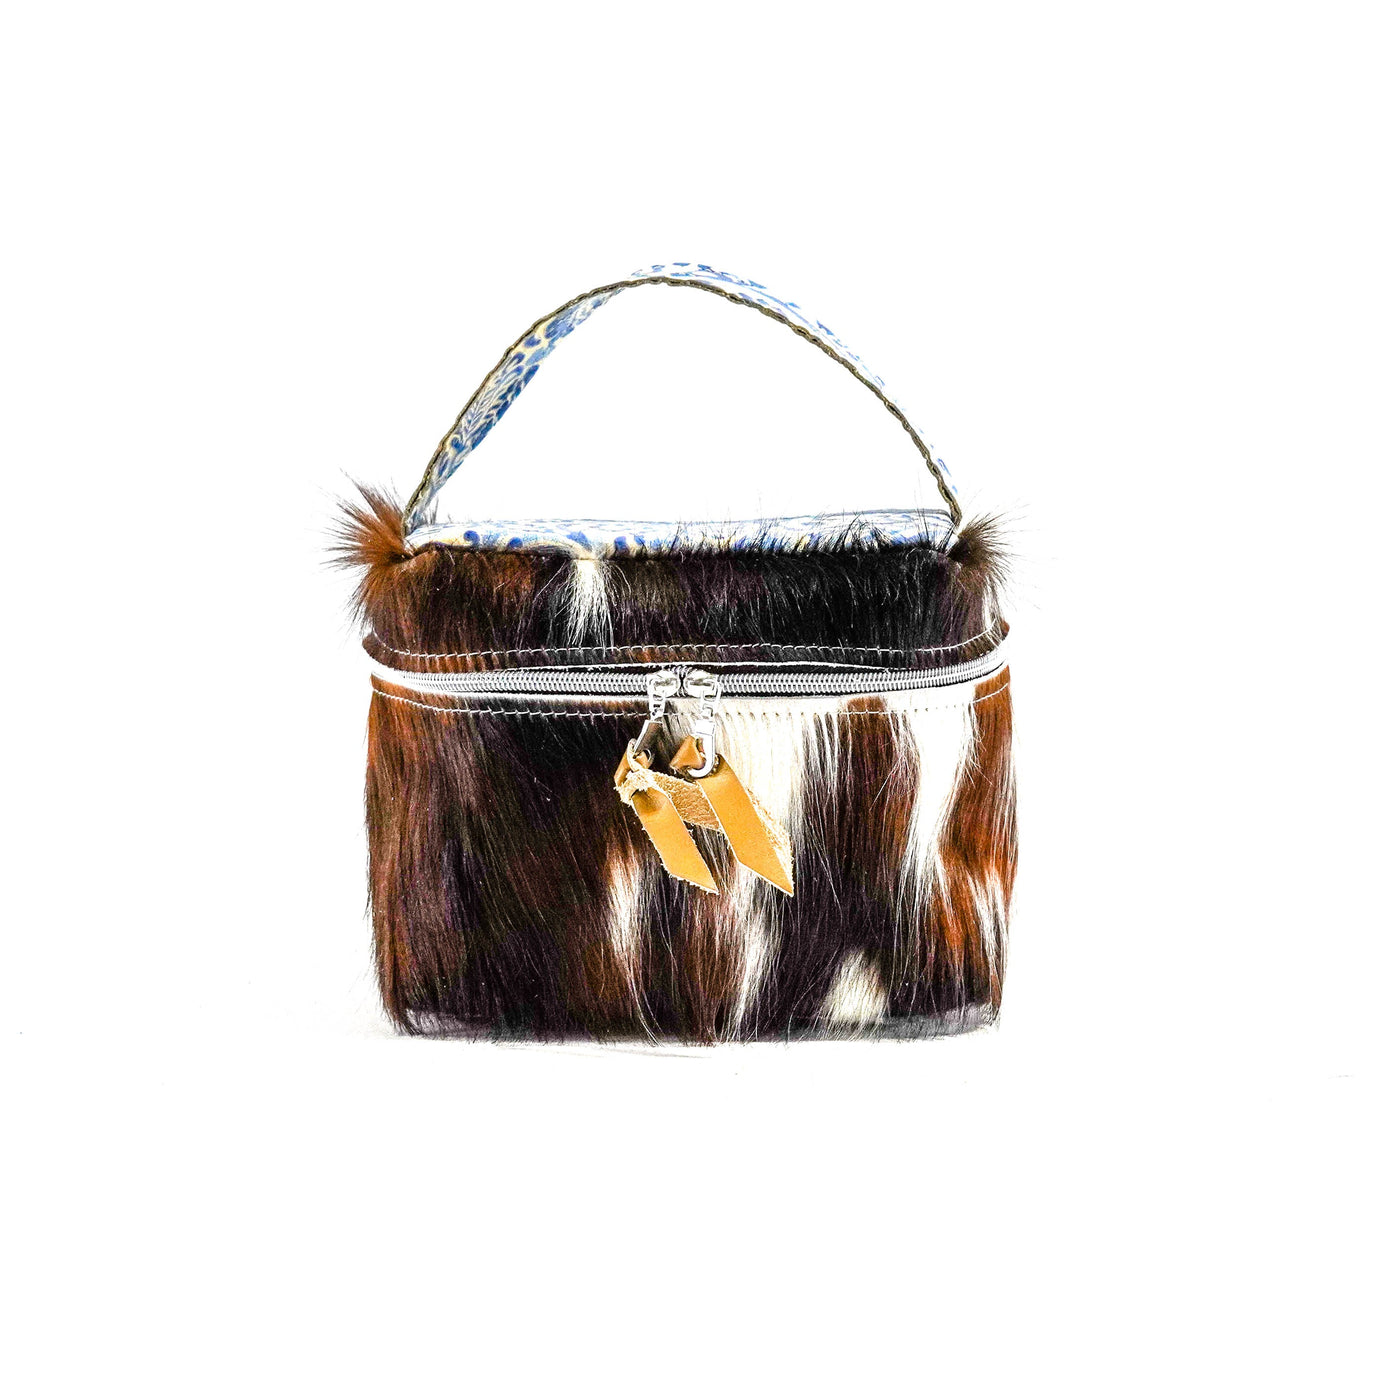 Caboose - Tricolor w/ Galaxy Tool-Caboose-Western-Cowhide-Bags-Handmade-Products-Gifts-Dancing Cactus Designs